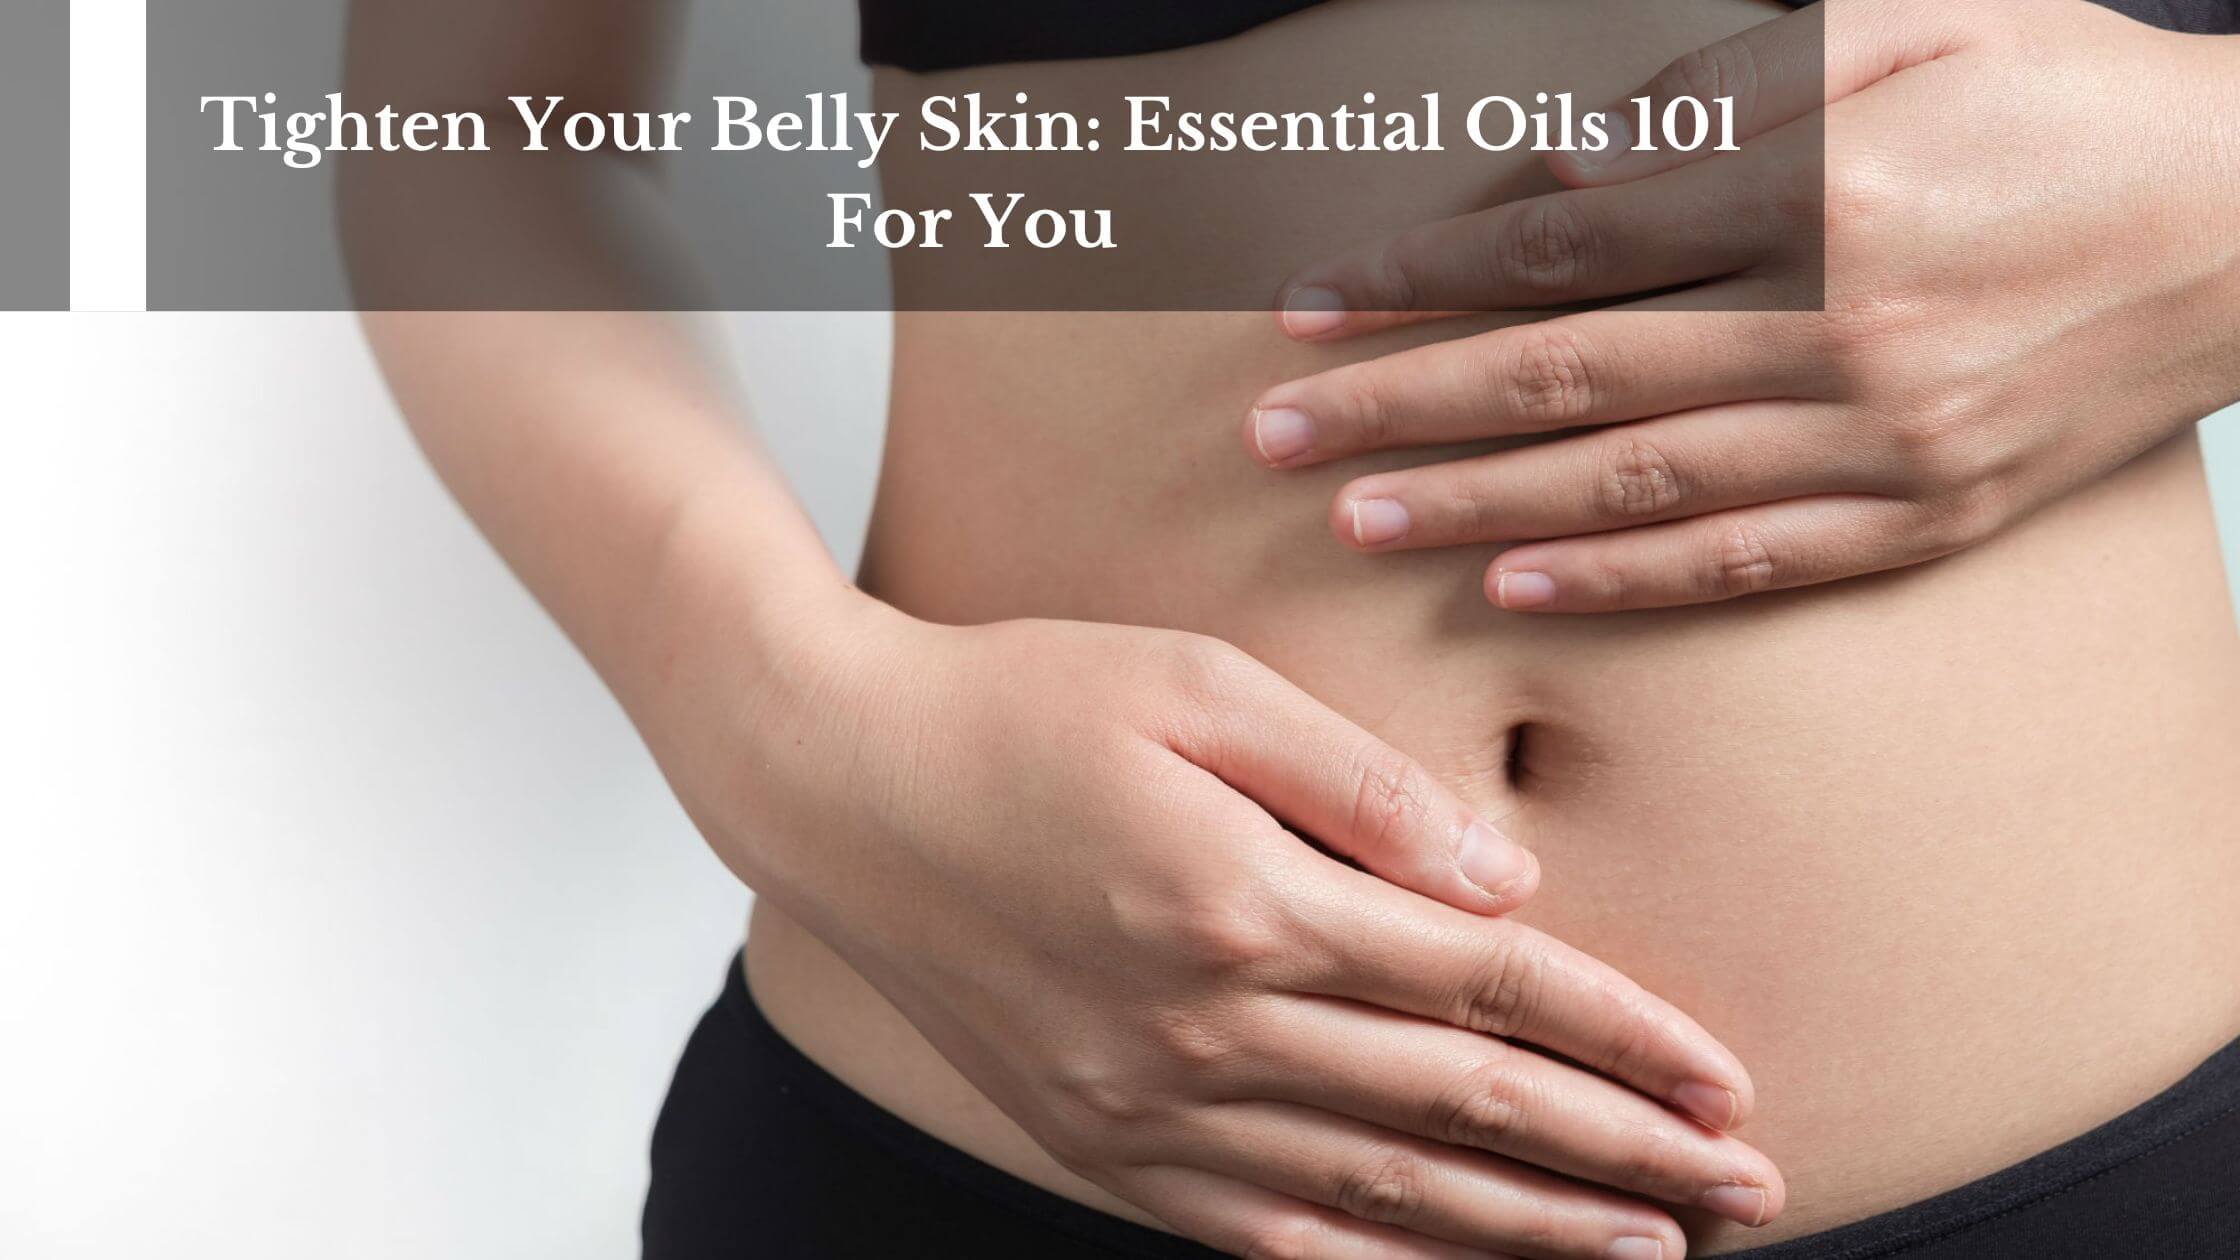 Tighten Your Belly Skin: Essential Oils 101 For You